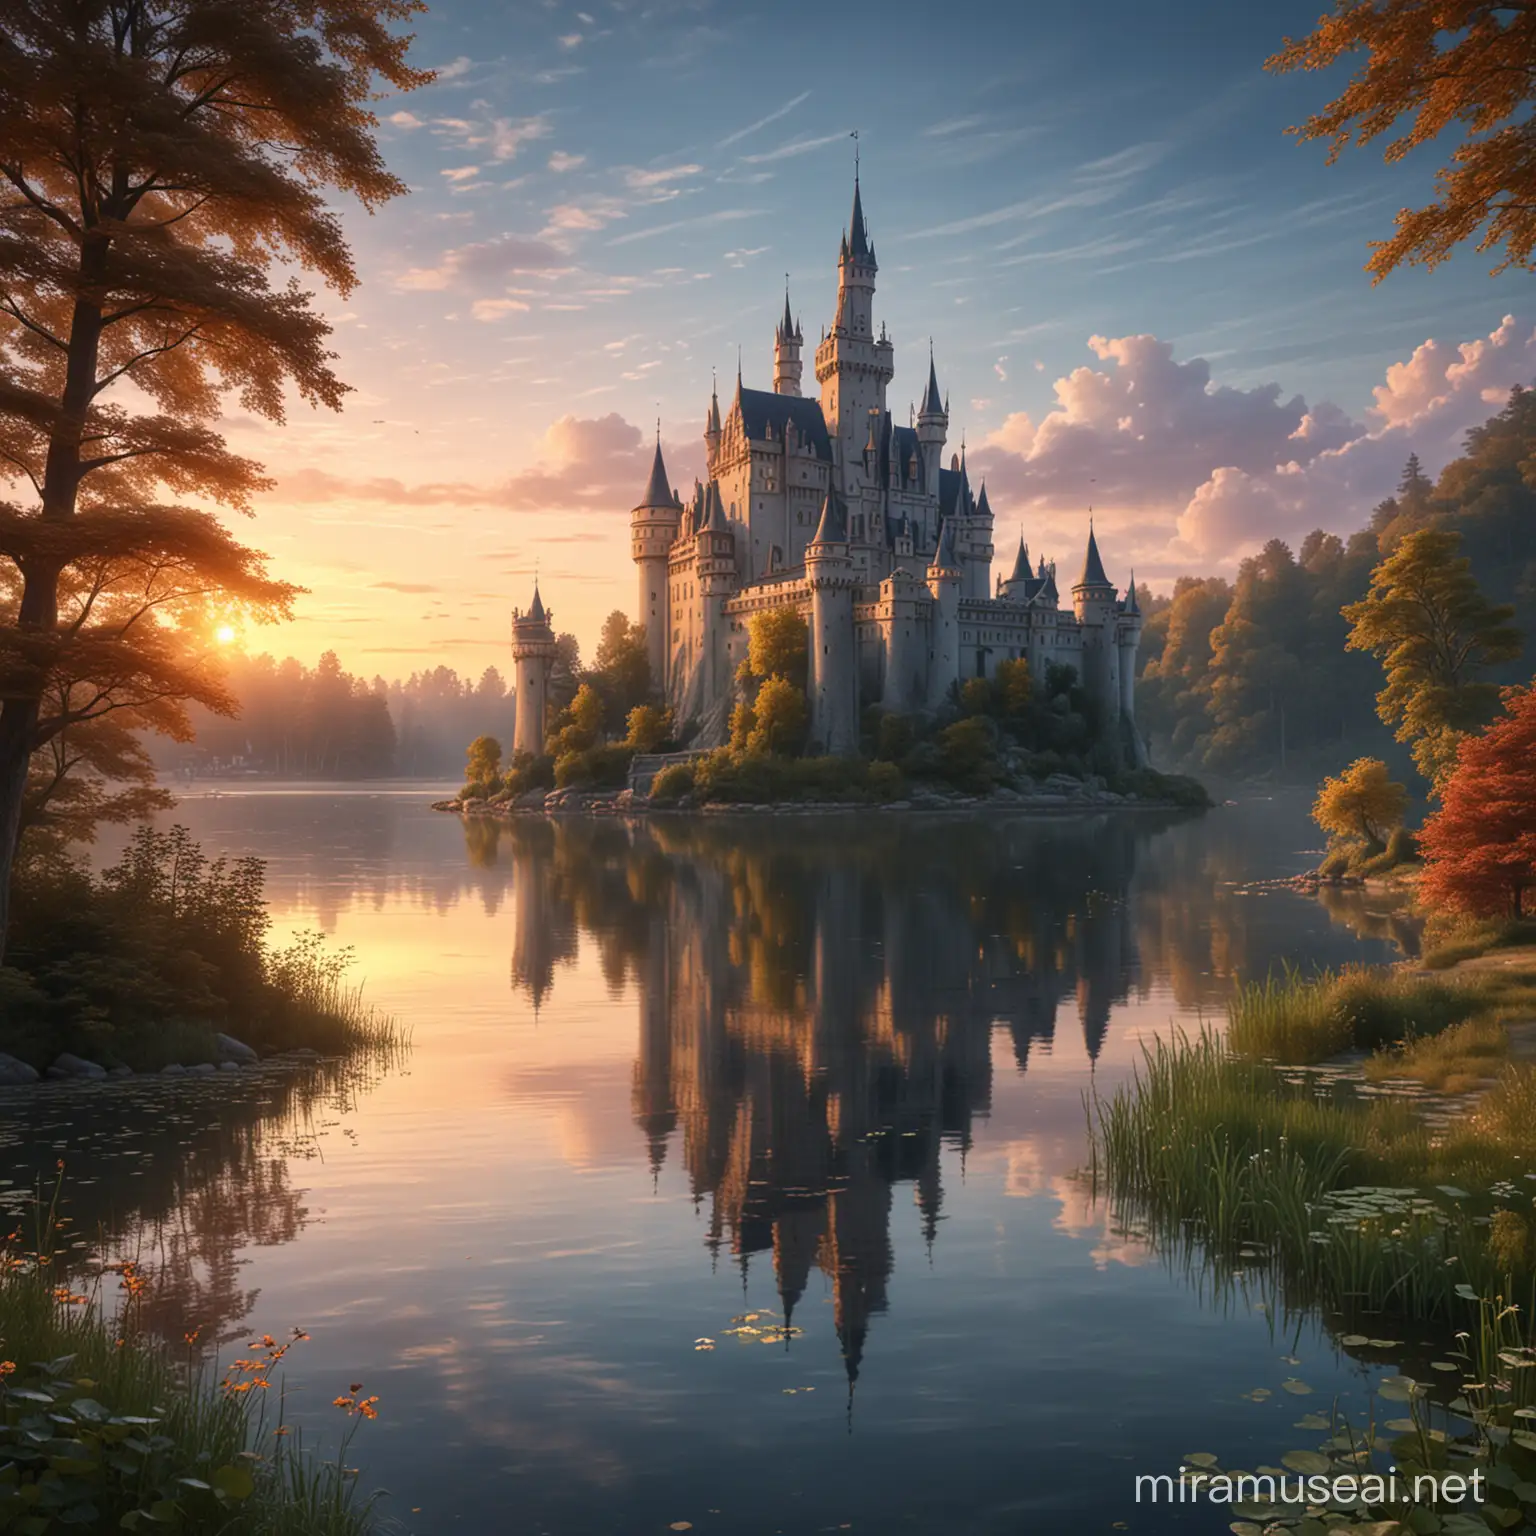 Majestic Fairy Tale Castle by a Sublime Dawn Lake